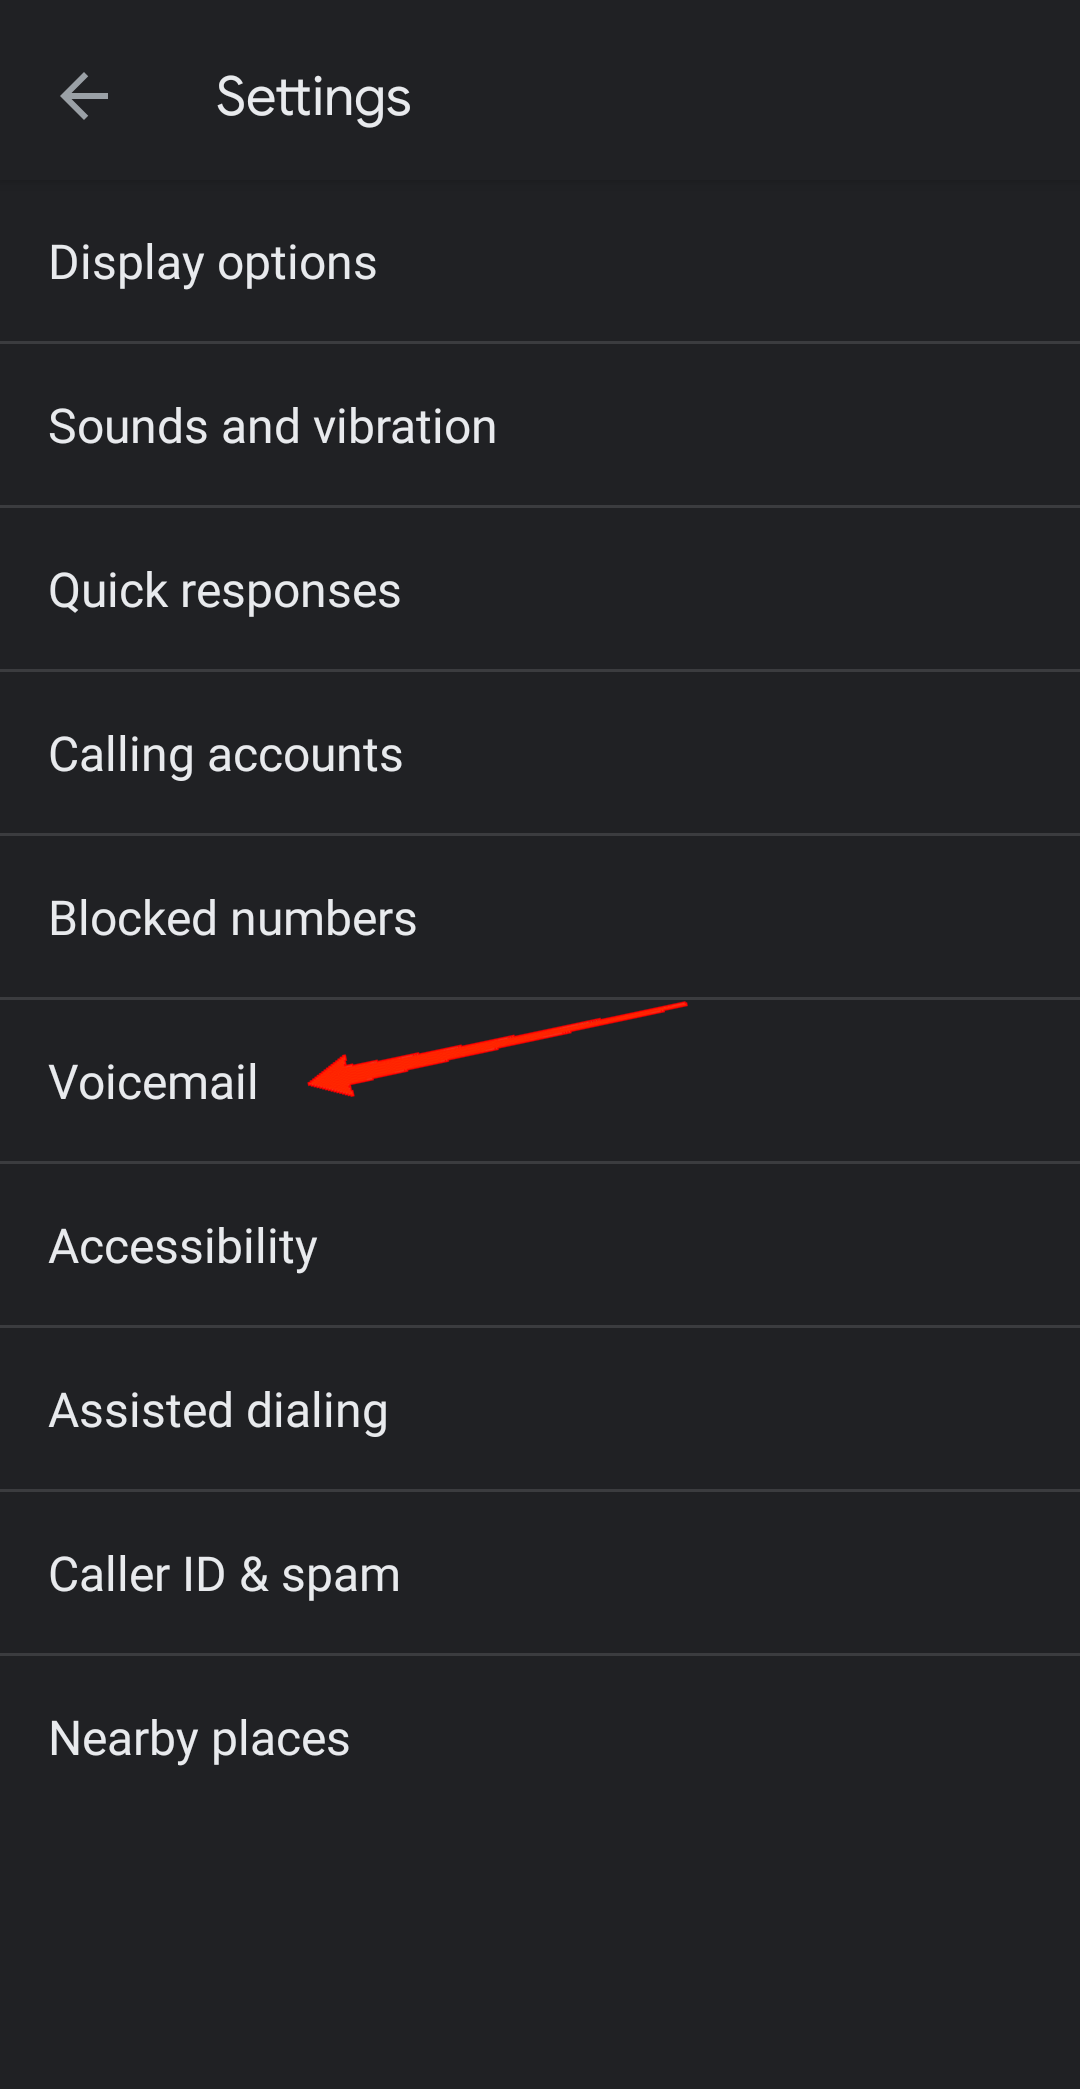 tap on Voicemail, and select Visual Voicemail